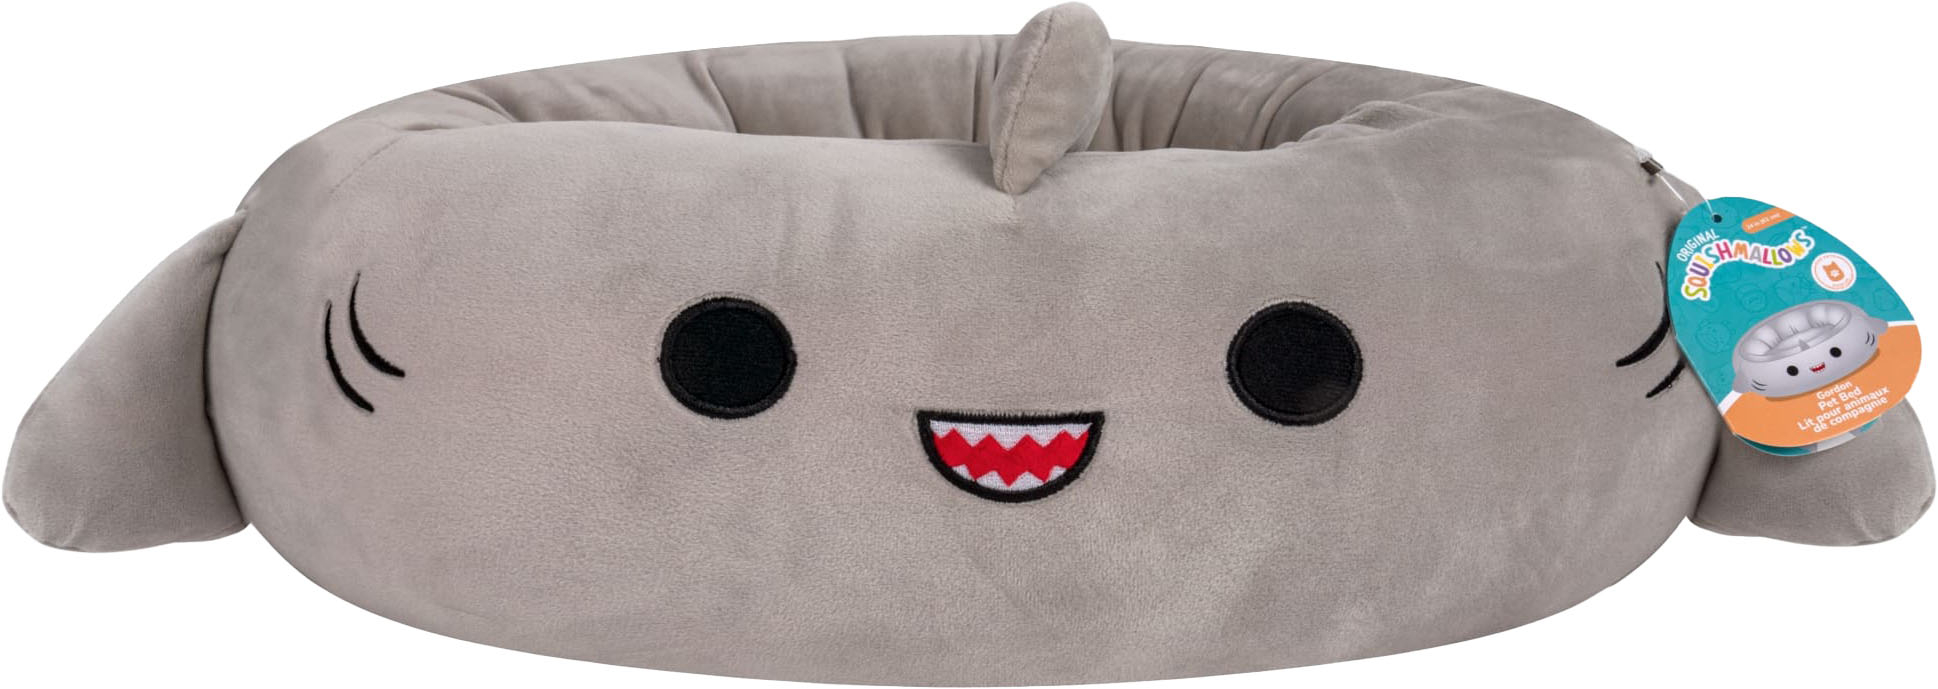 Angle View: Jazwares - Squishmallows Pet Bed - Gordon the Shark - Small